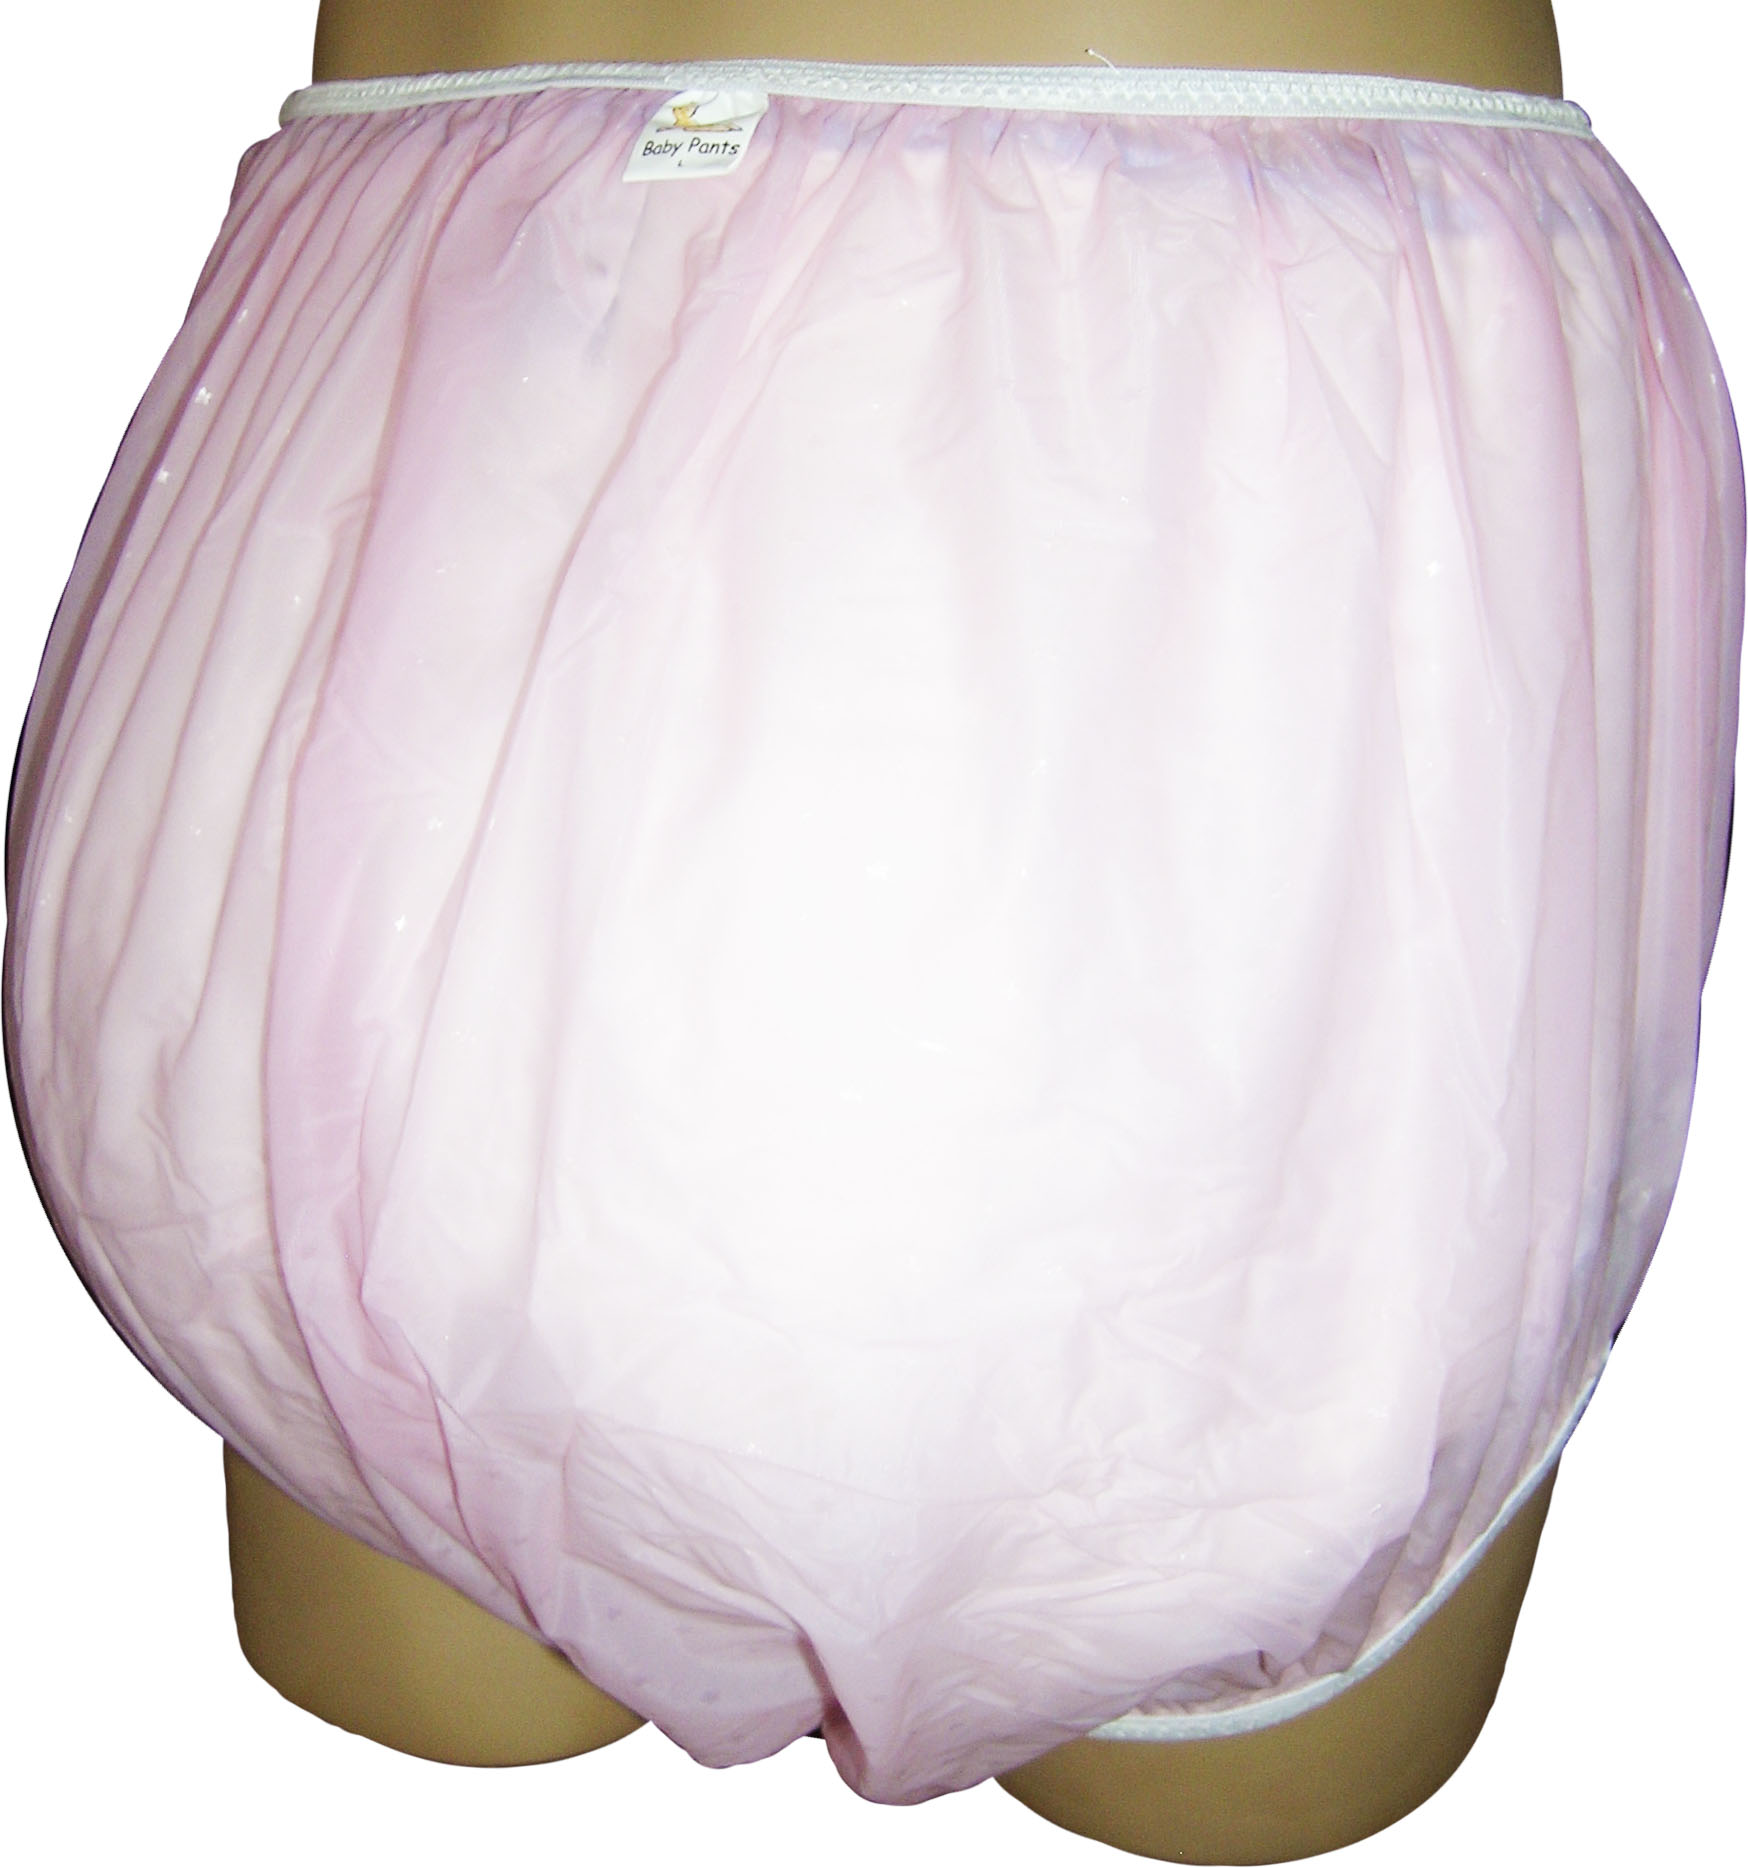 PVC Locking Diaper Rubber Trousers Adult Baby Size S-2XL